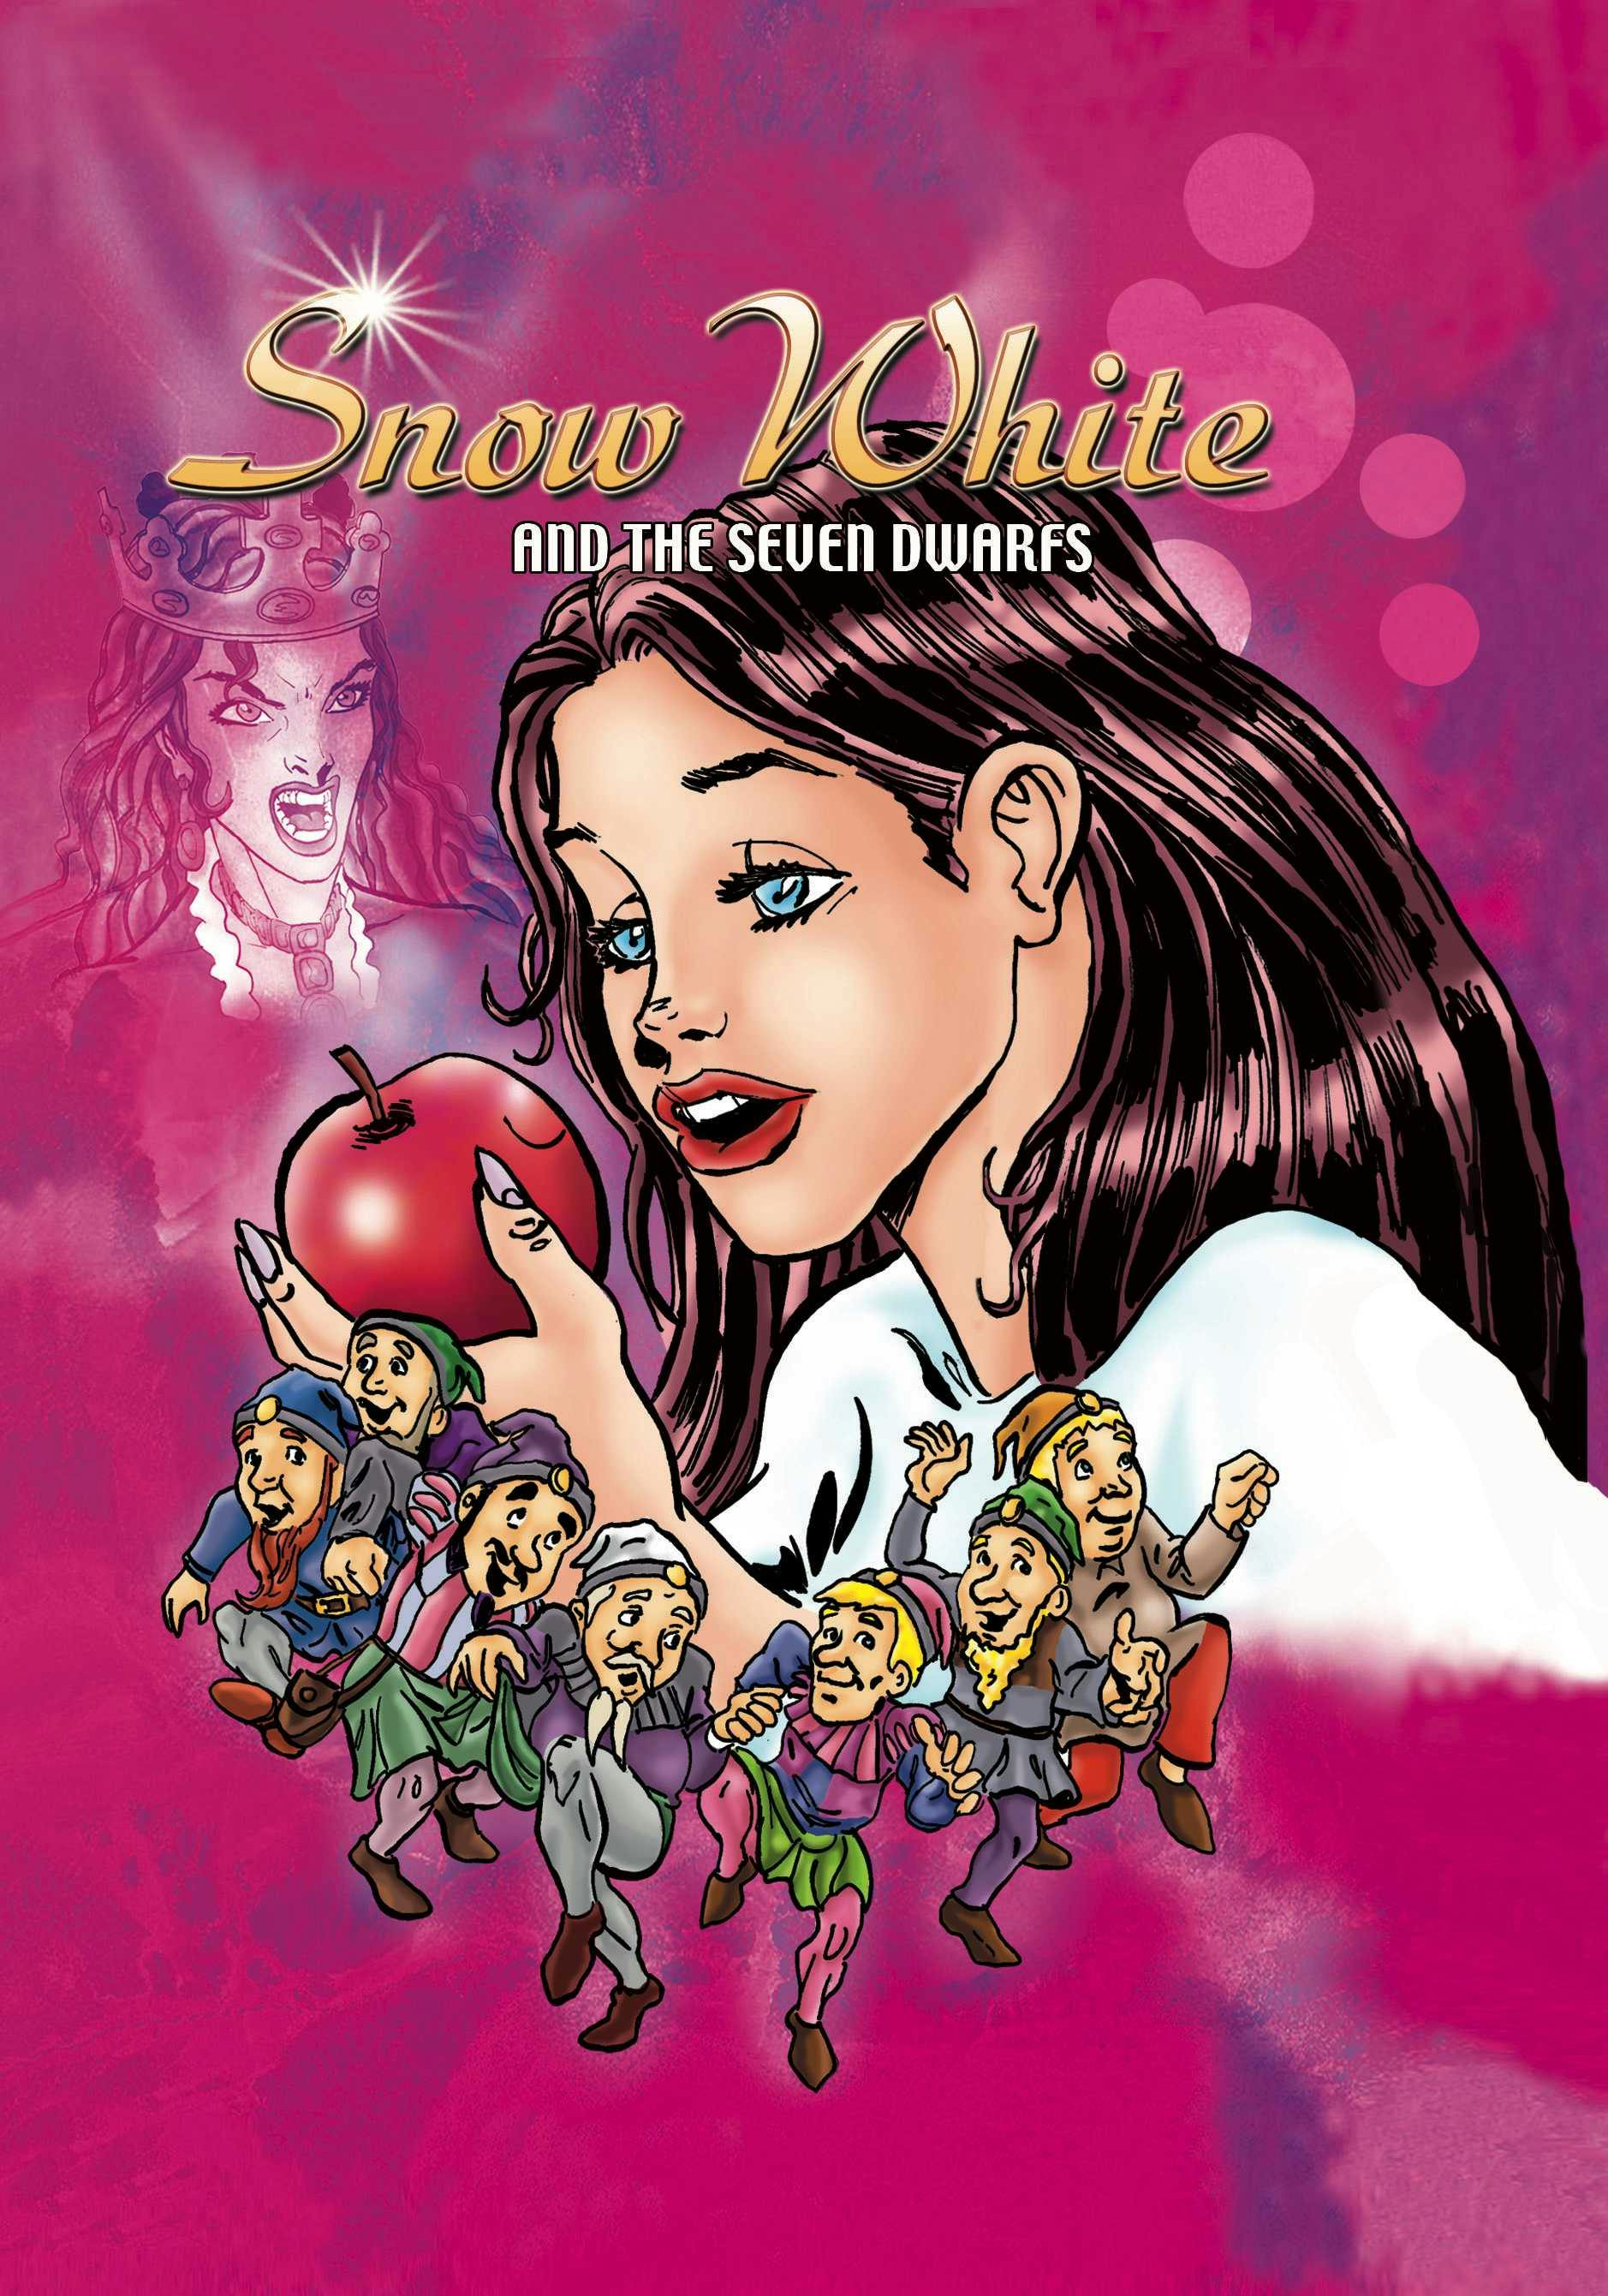 The Snow White and the seven dwarfs - undefined